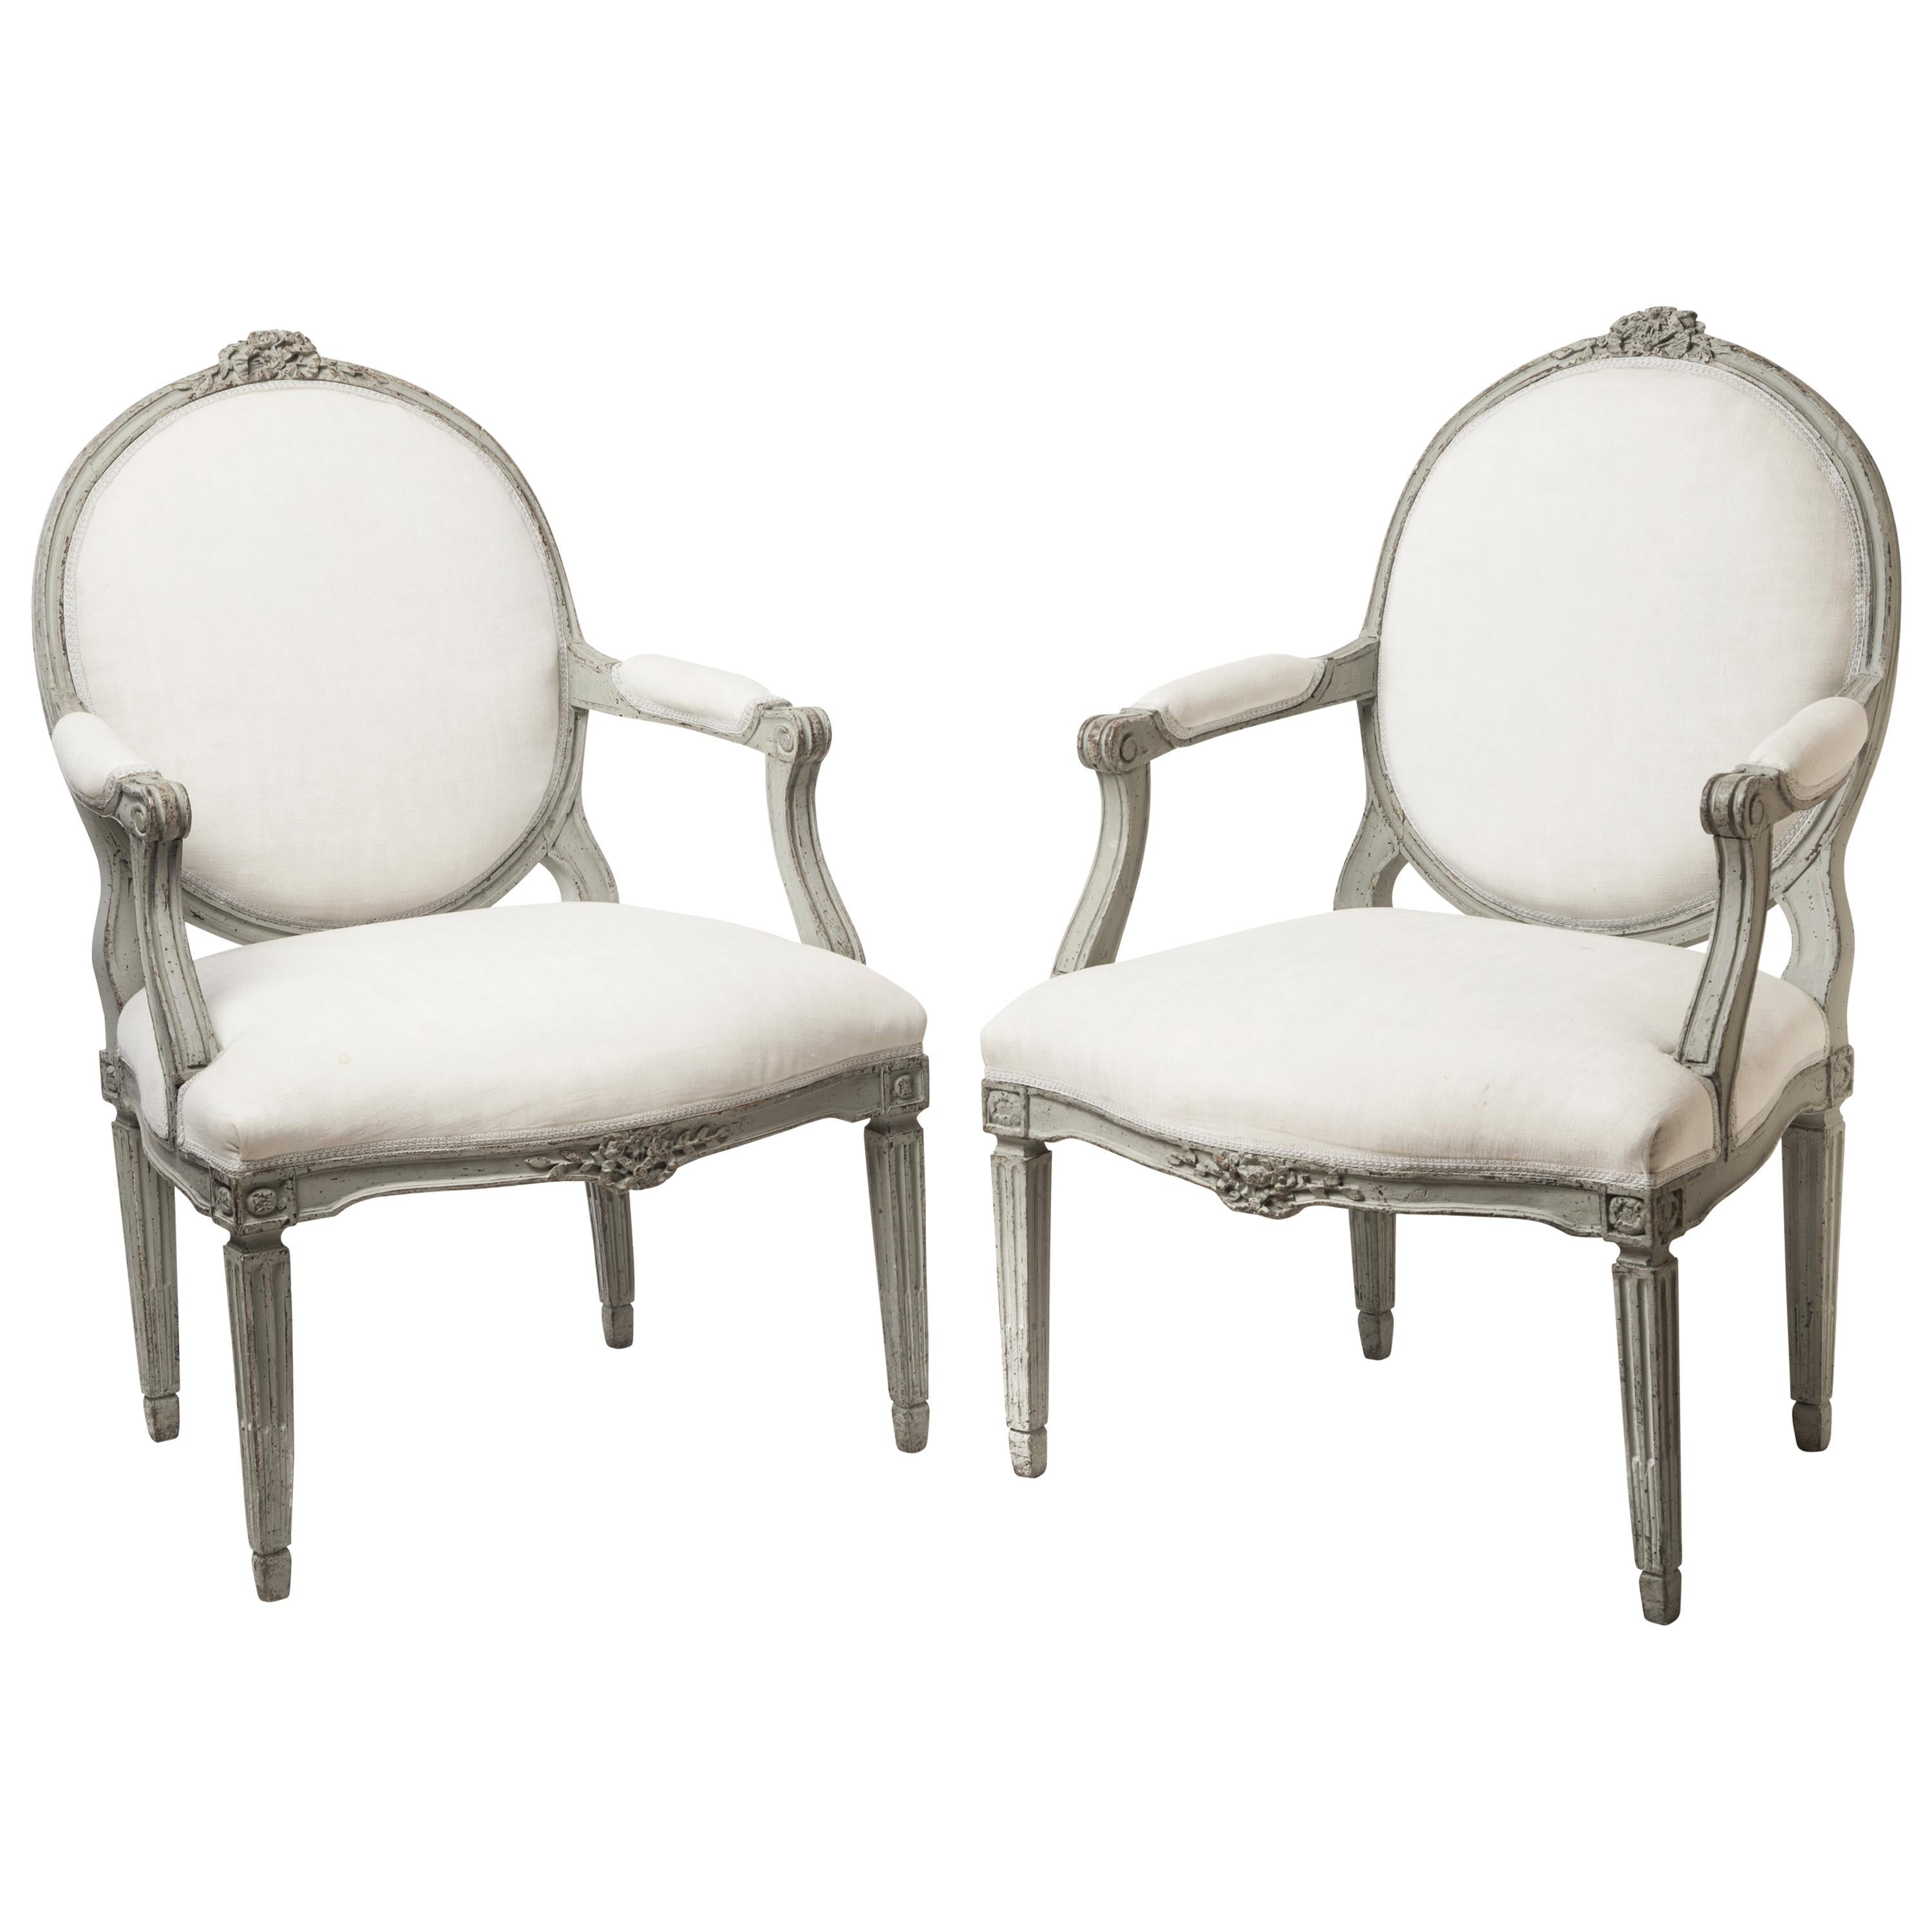 Pair of Antique Swedish Fauteuils / Armchairs 18th Century